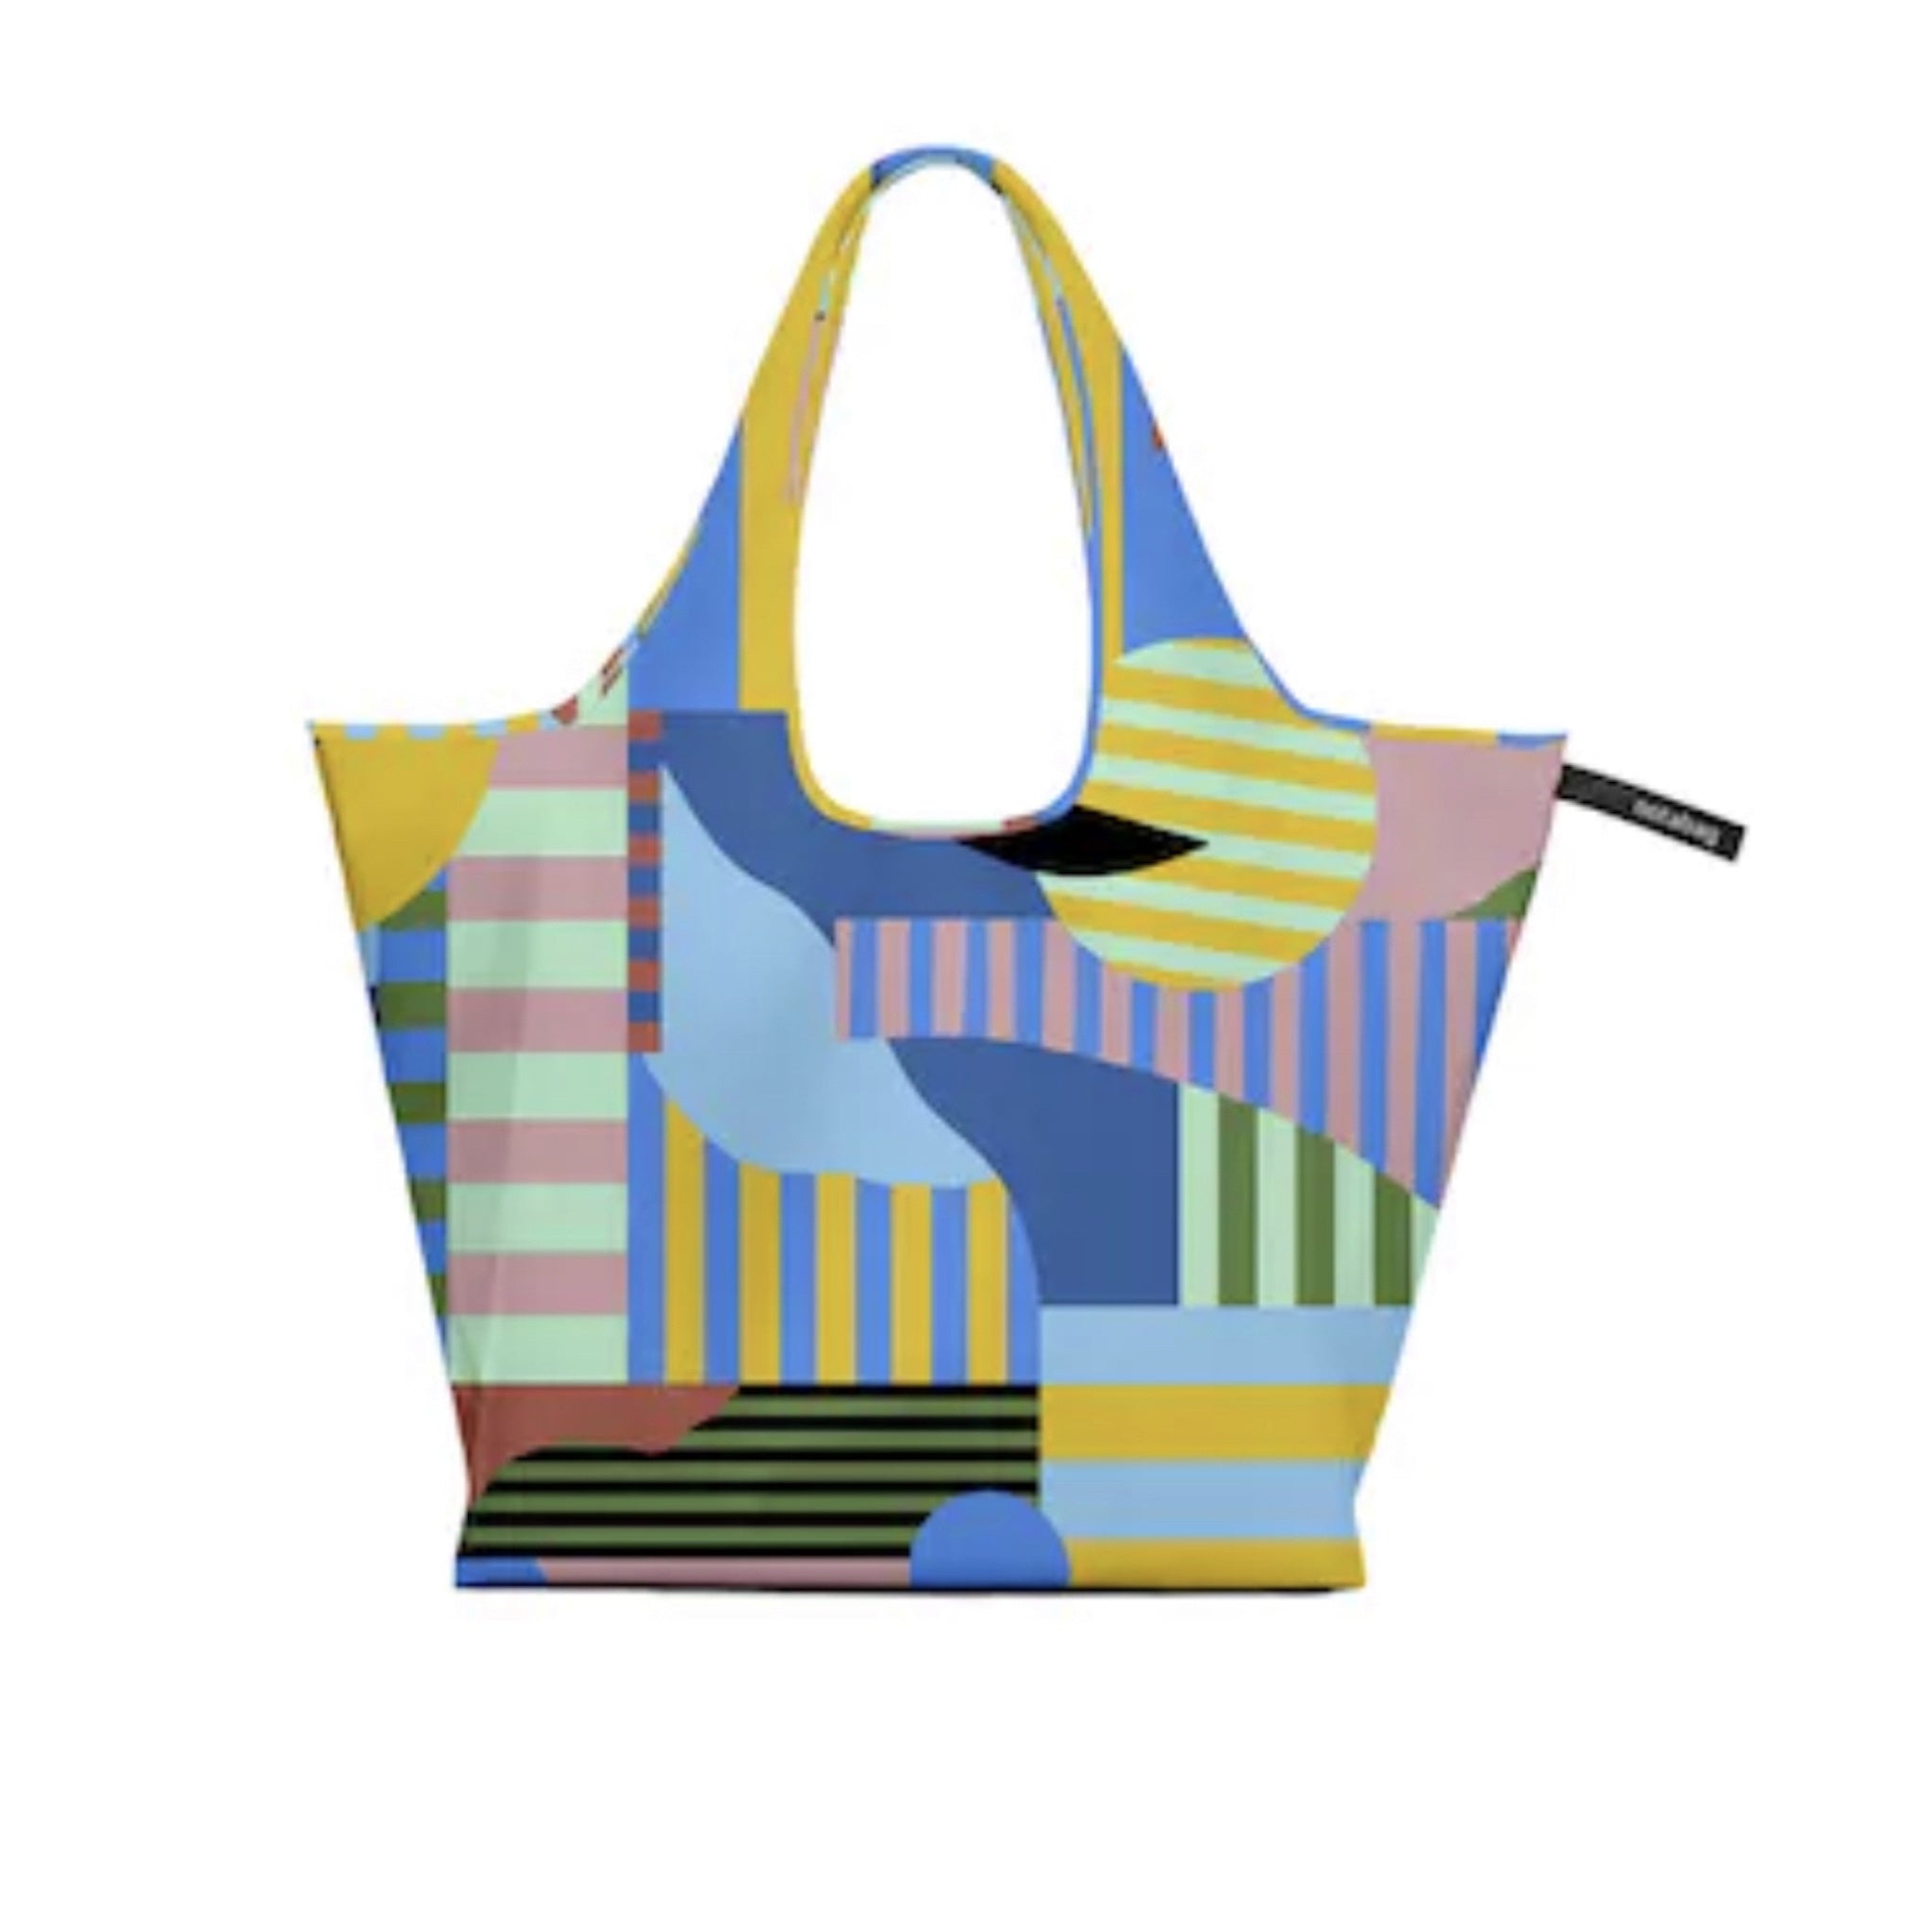 Landscape Foldable Recycled Tote Bag